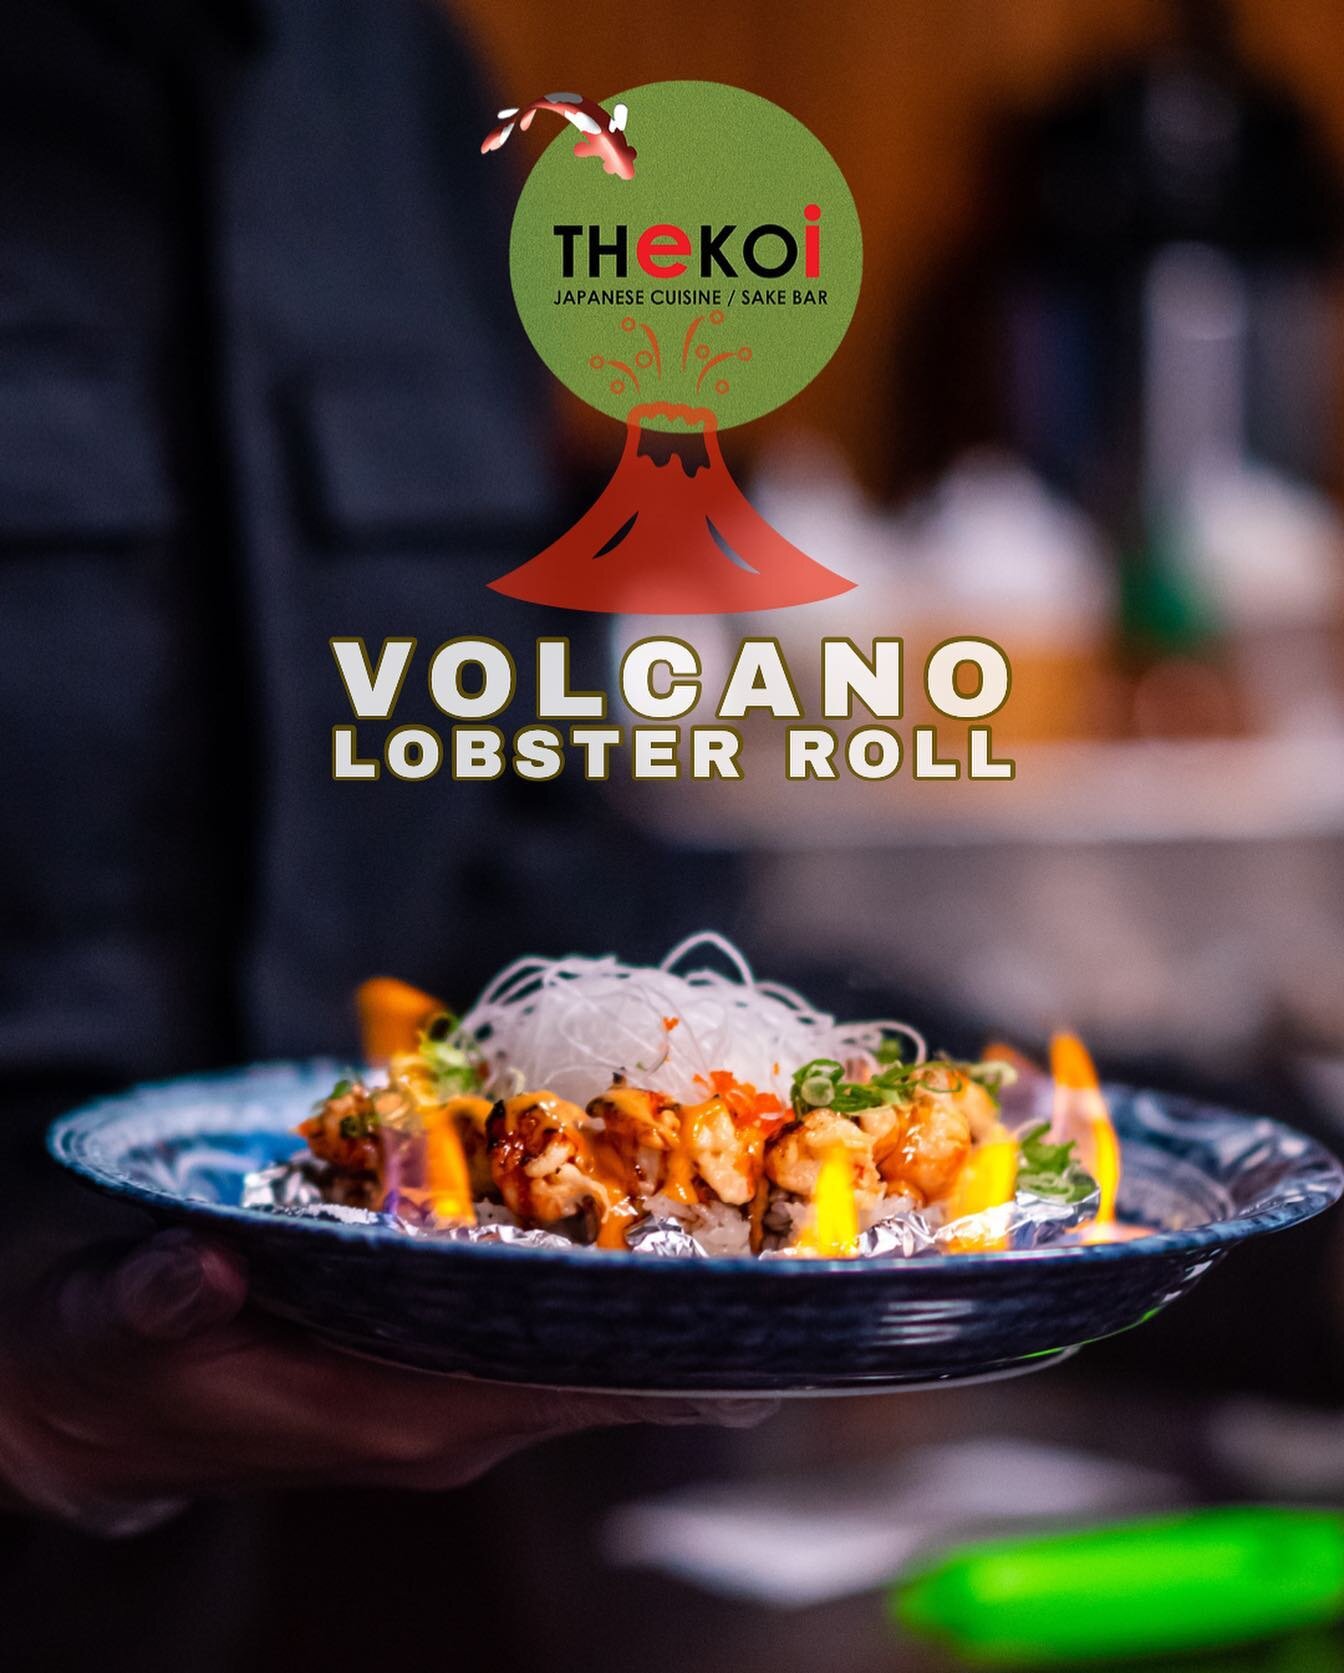 ITS LITTTTY!
Set that Sushi 🍣 on Fire 🔥 
The Volcano 🌋 Lobster 🦞 Roll is Perfect to Heat Up date night!
Where&rsquo;s your go to Date Night spot in Tacoma? 
Dine in again with us in Downtown Tacoma
thekoitacoma.com 
&bull;
&bull;
&bull;
&bull;
&b